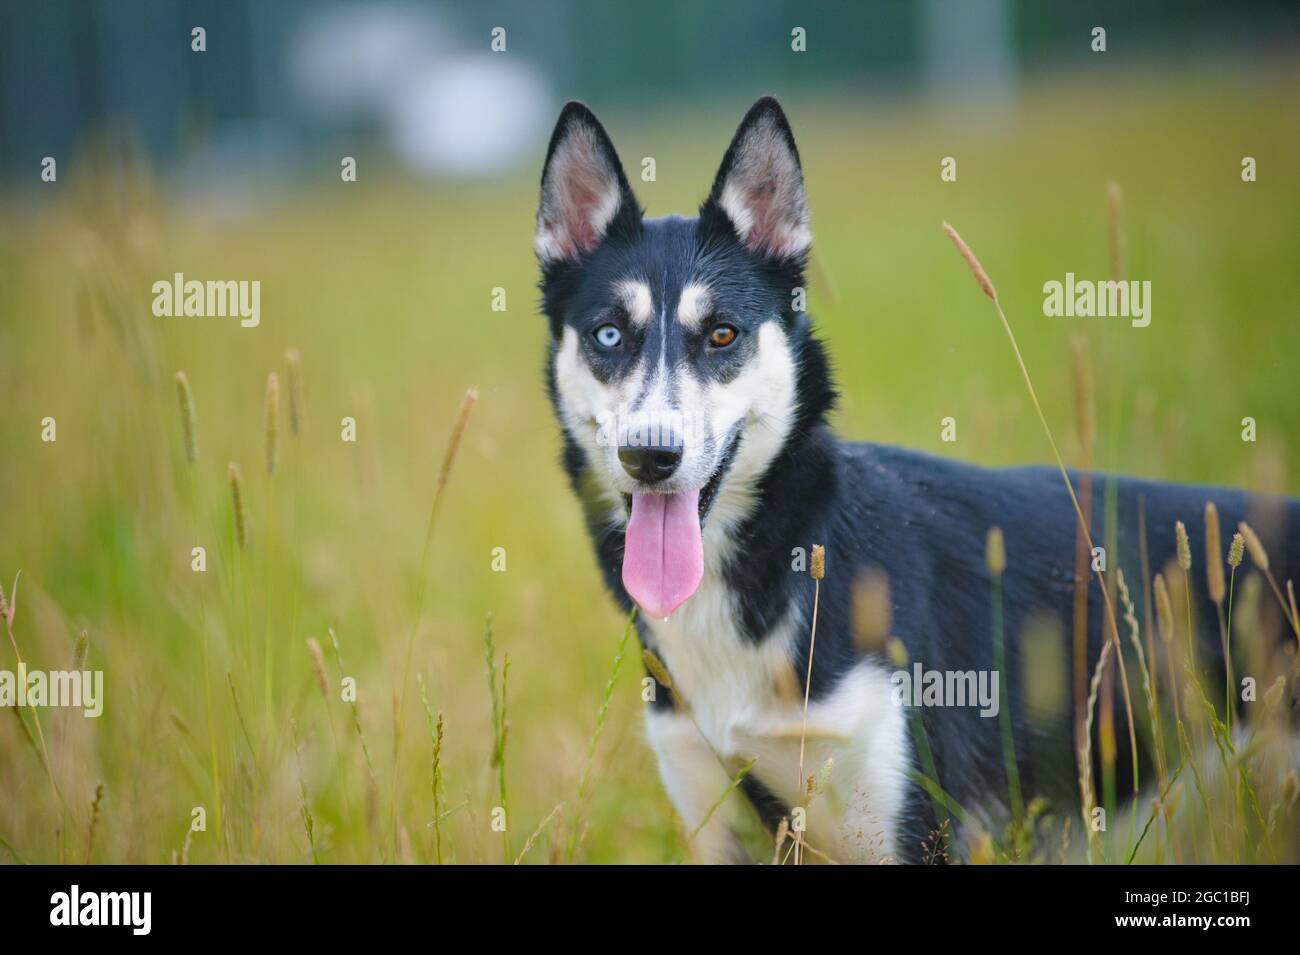 Cute young husky dog with different coloured eyes in a summer field Stock Photo